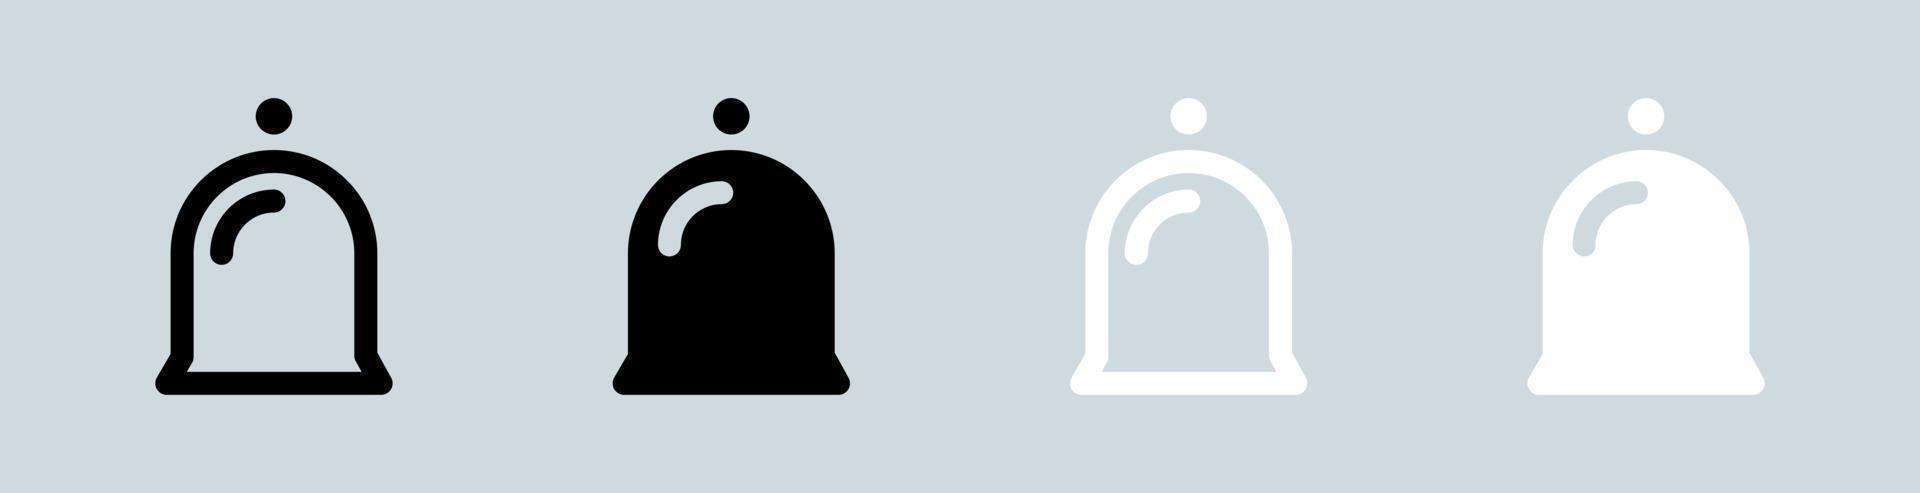 Bell notification icon set in black and white. Alert signs vector illustration.